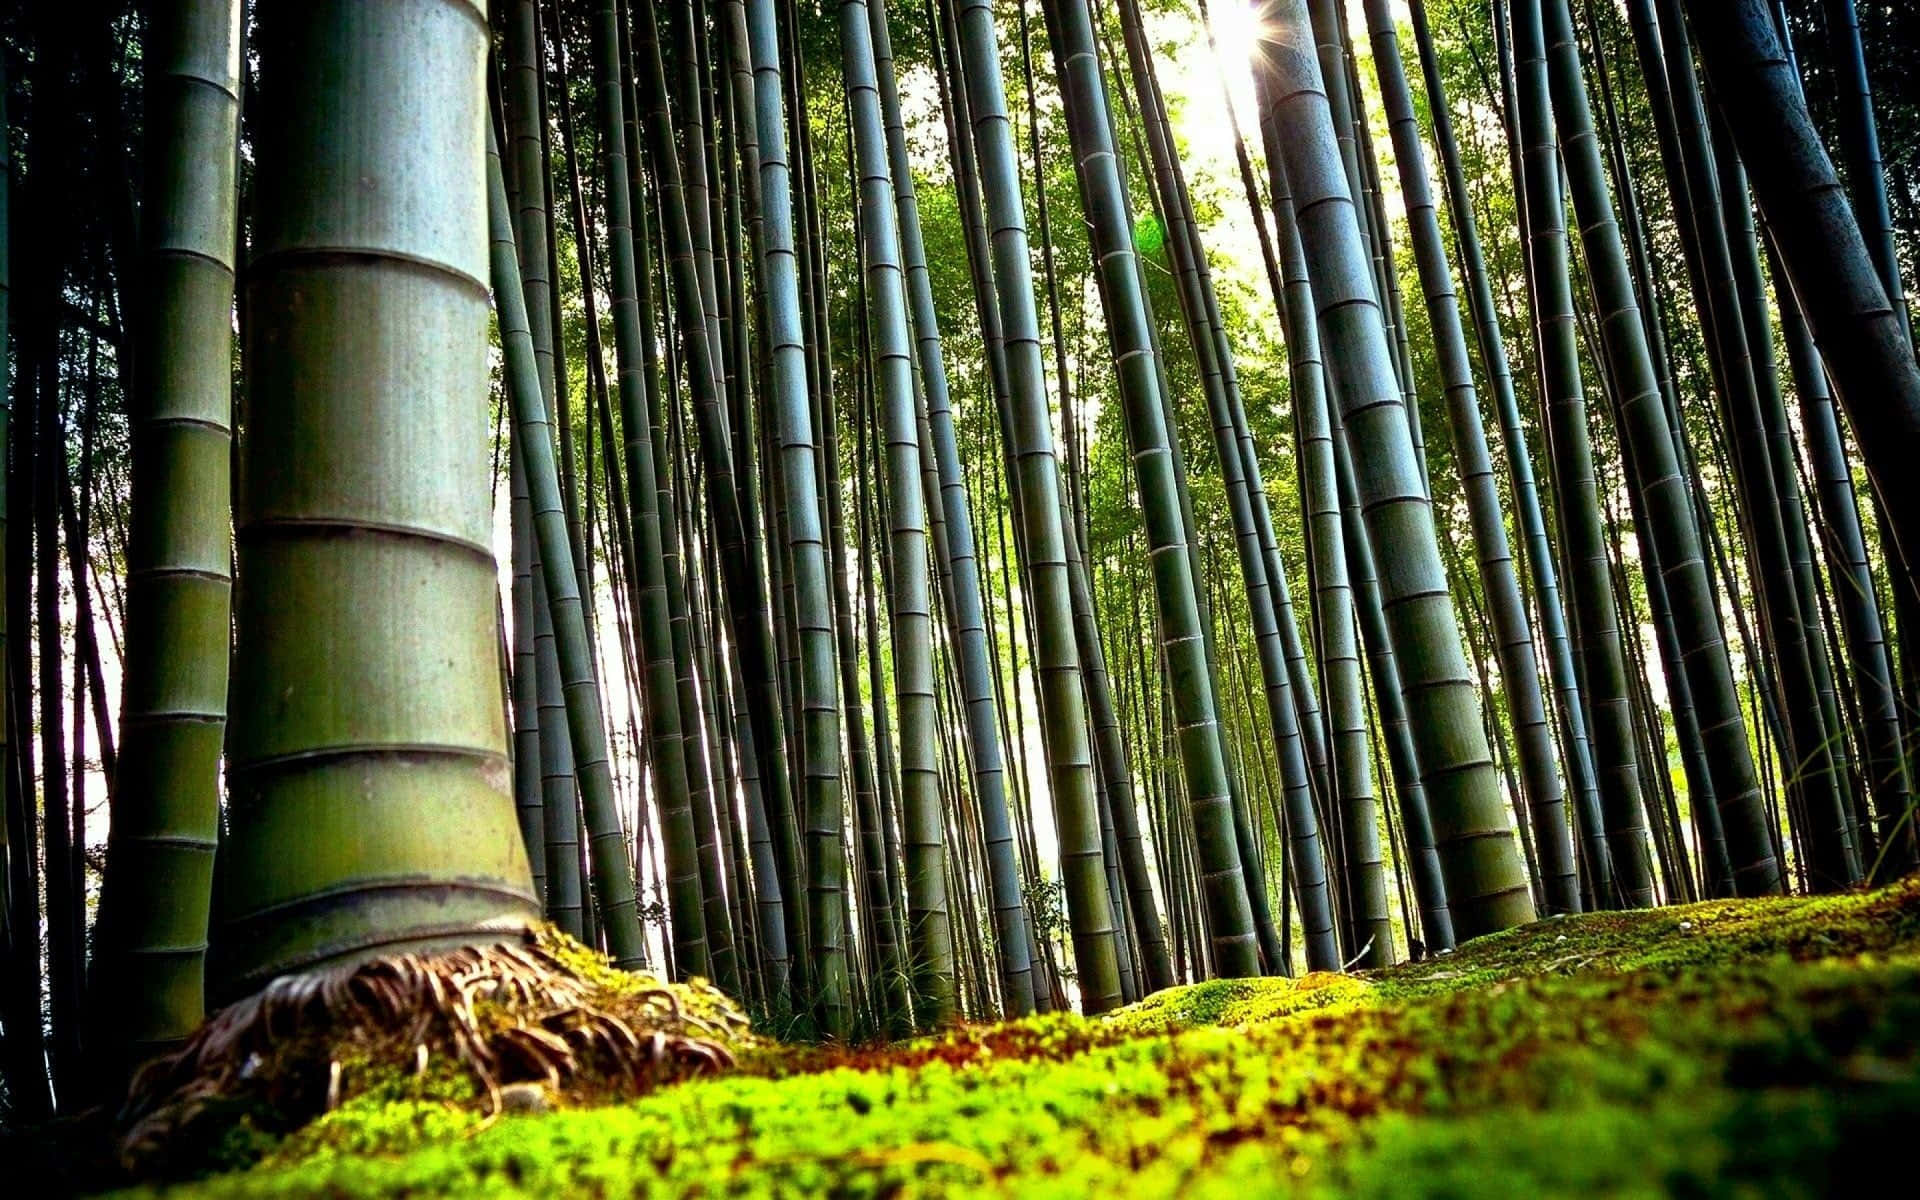 A grove of green bamboo stands tall in the forest Wallpaper